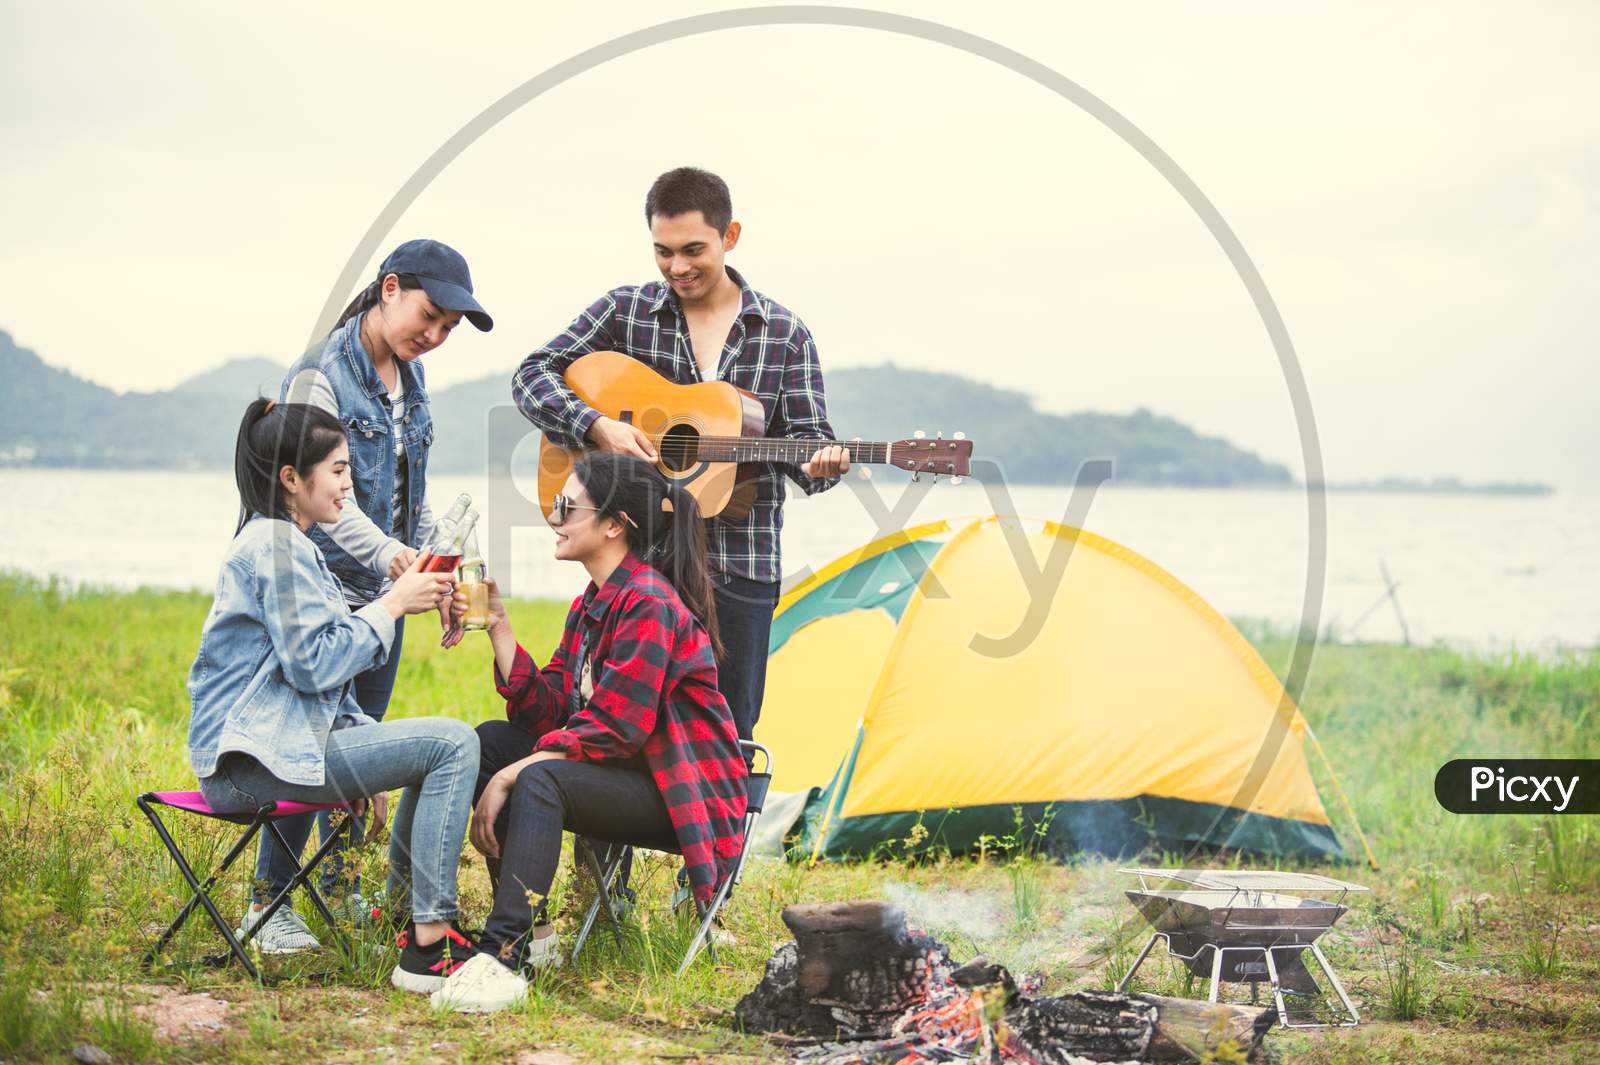 Group Of Asian Friendship Clinking Drinking Bottle Glass For Celebrating In Private Party With Mountain And Lake View Background. People Lifestyle Travel On Vacation Concept. Picnic And Camping Tent